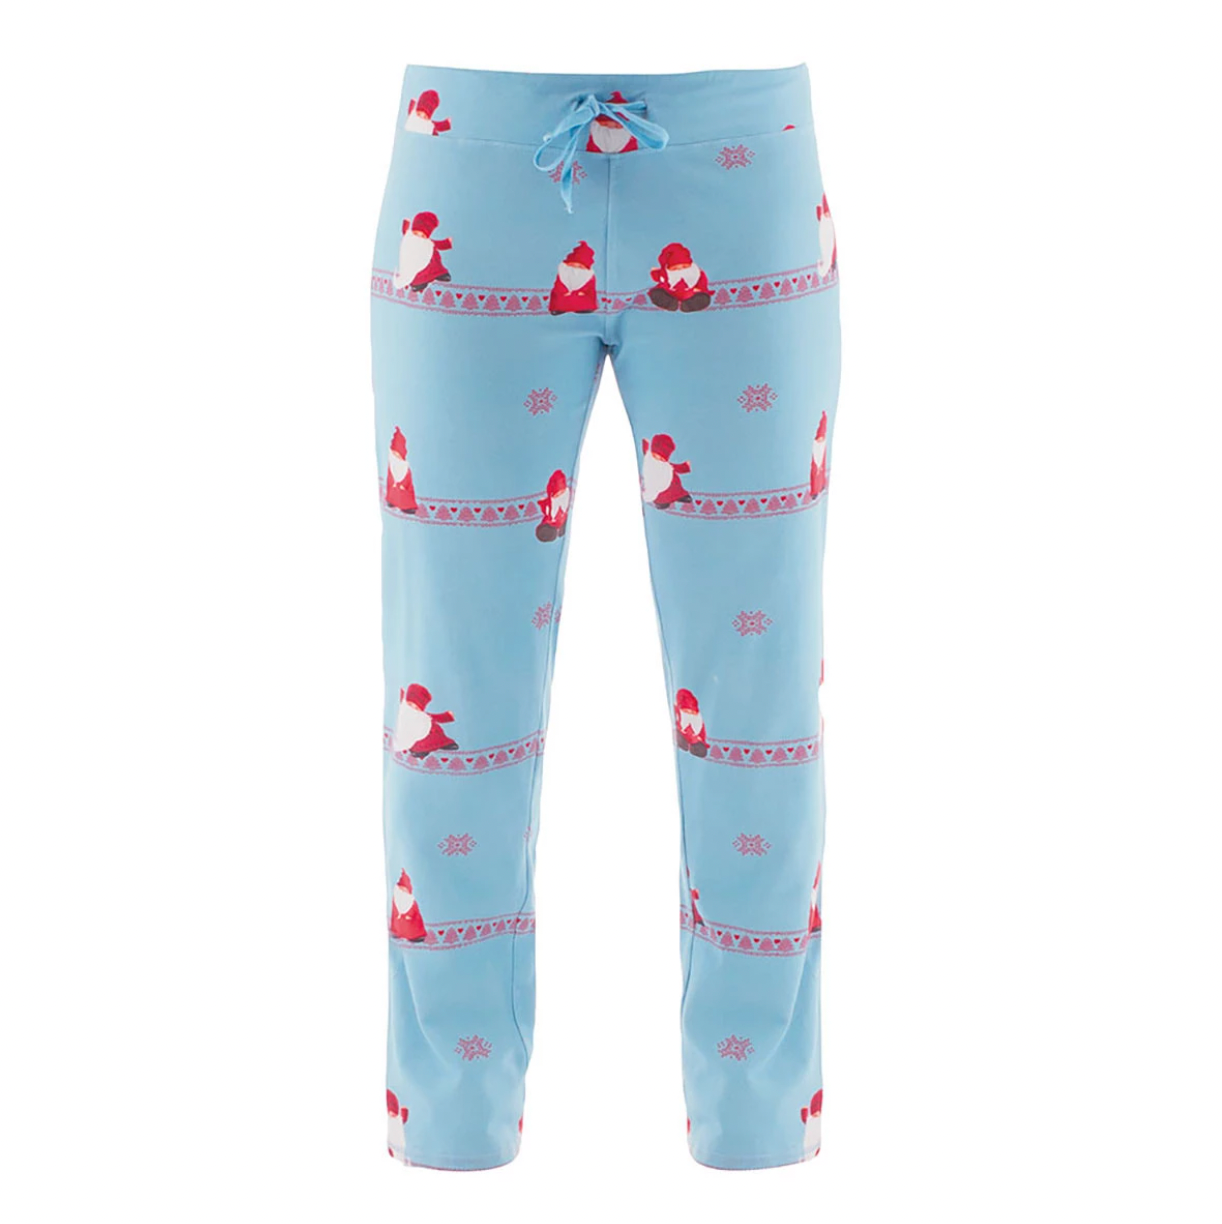 Old Ranch Gnome PJ Pants in Turquoise